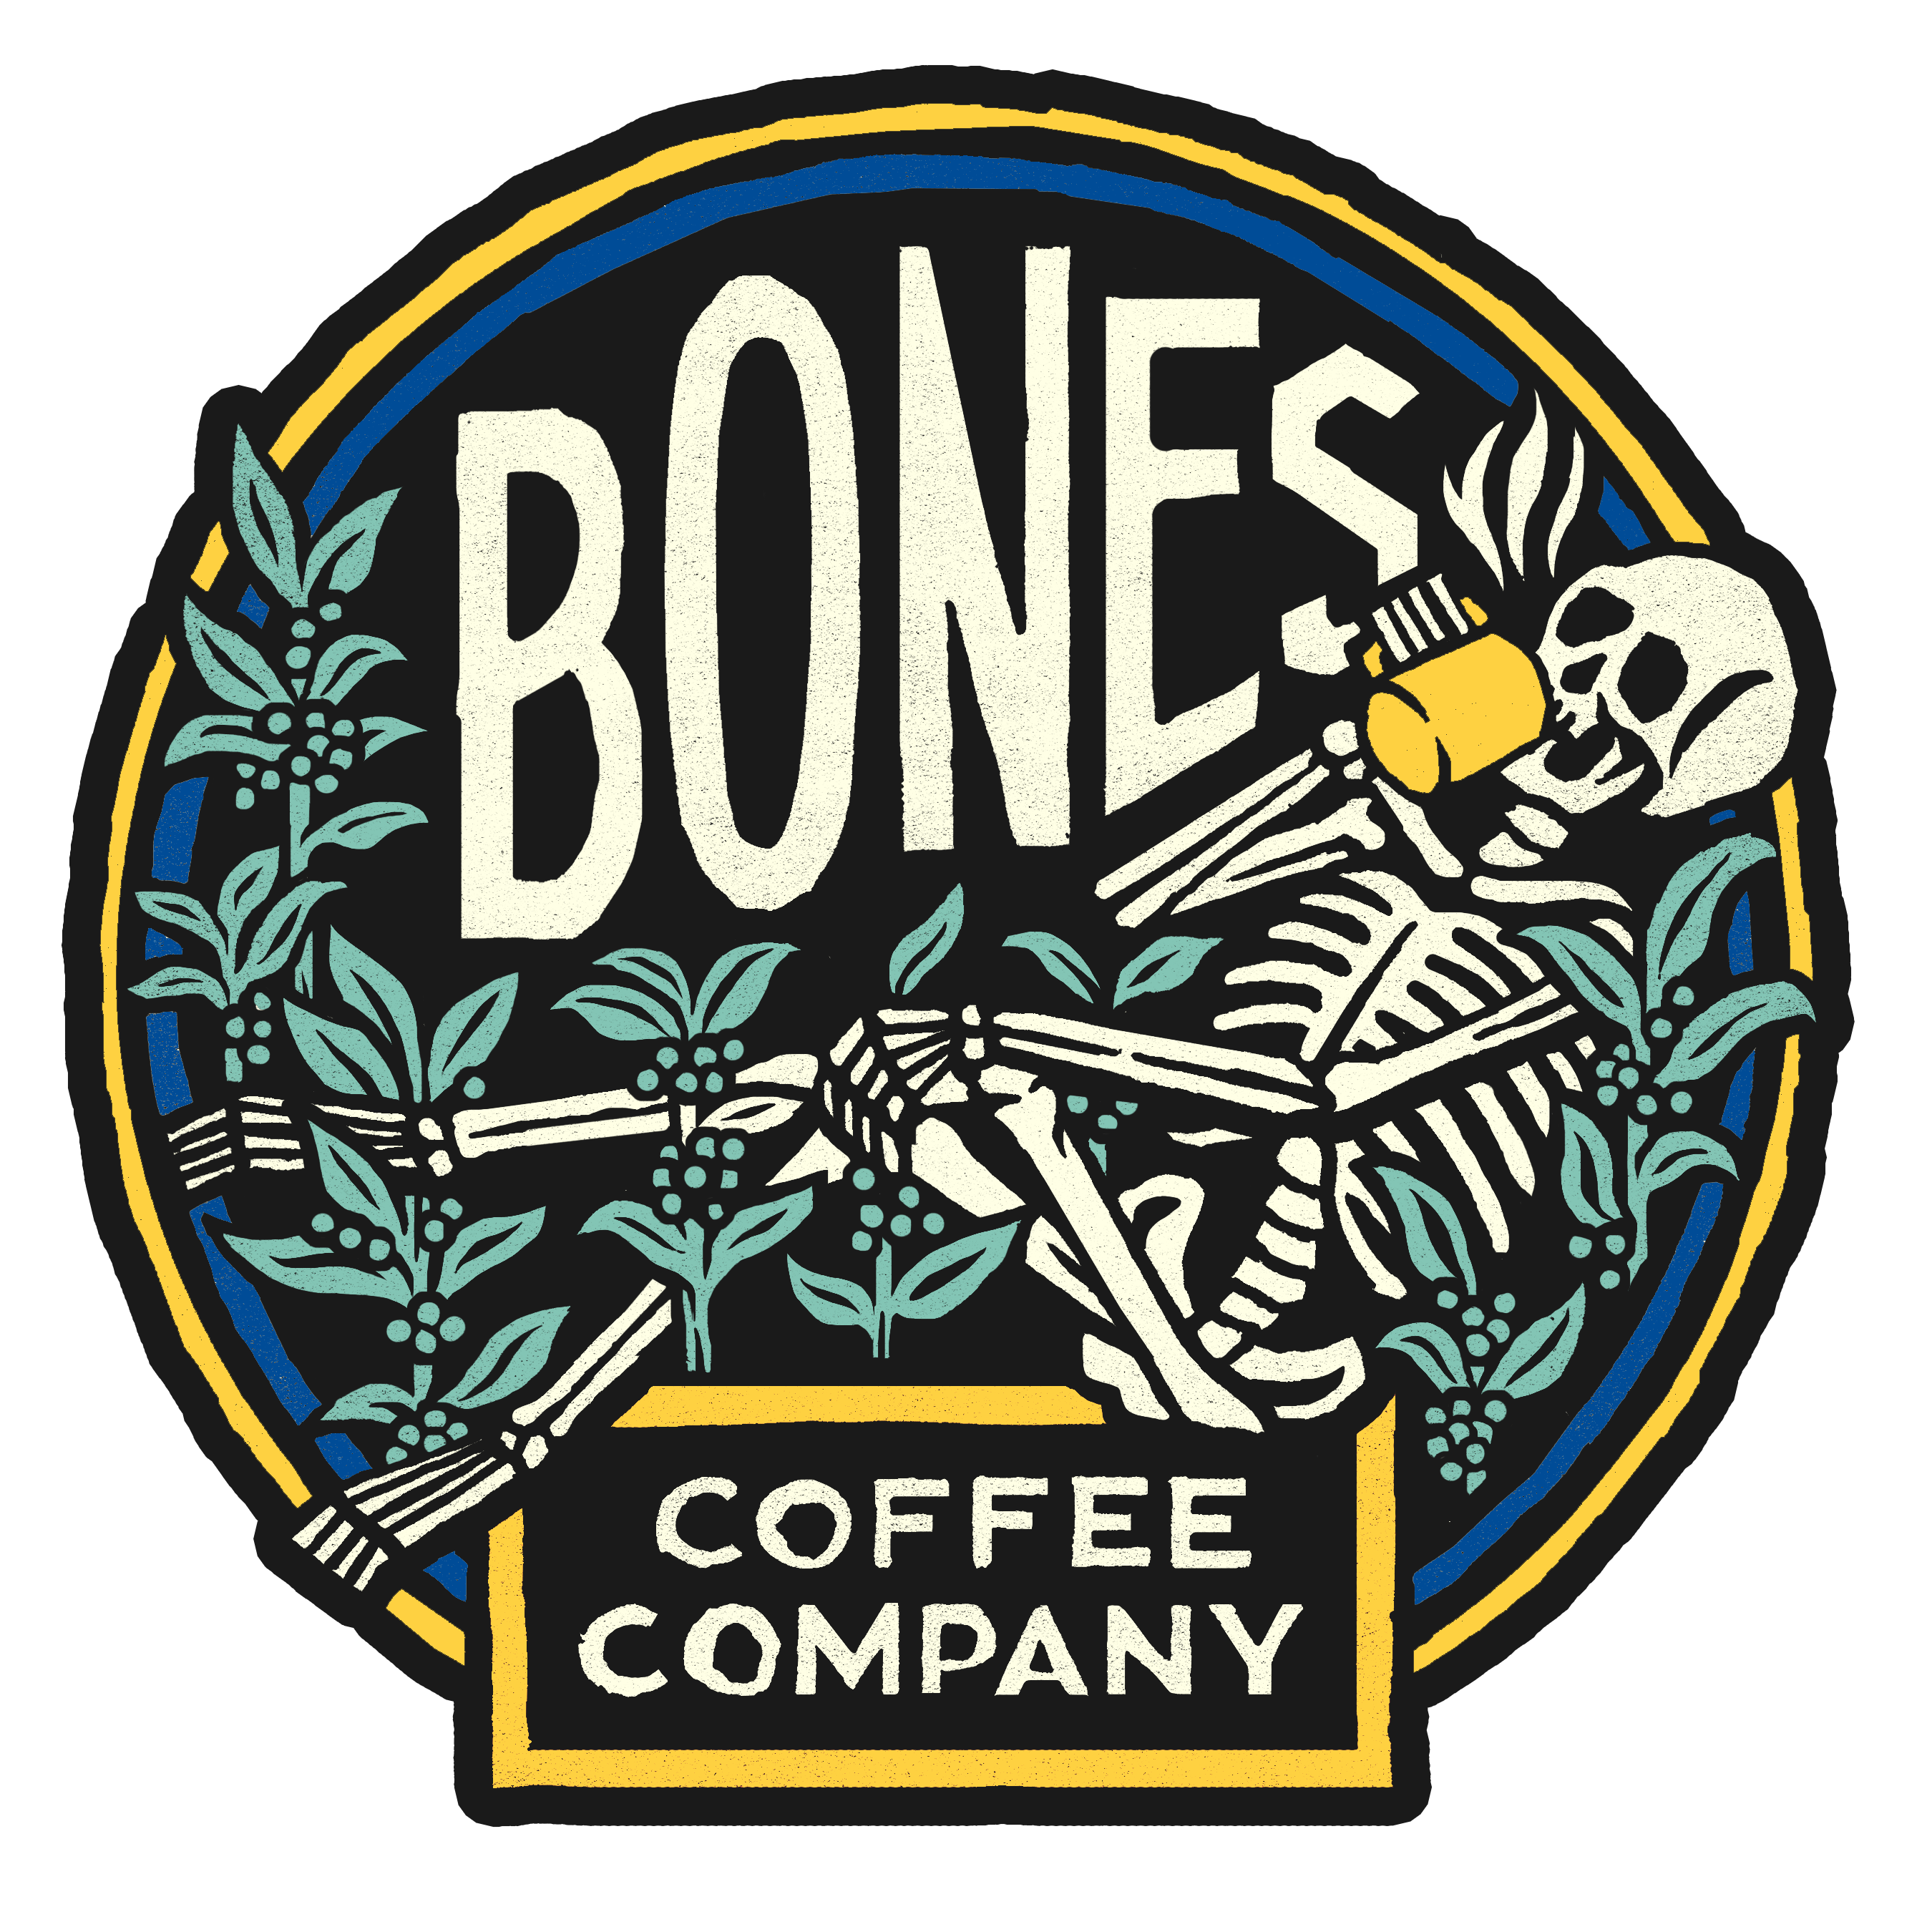 The Bones Coffee Company logo. It has a skeleton lounging in greenery drinking a cup of coffee on it.